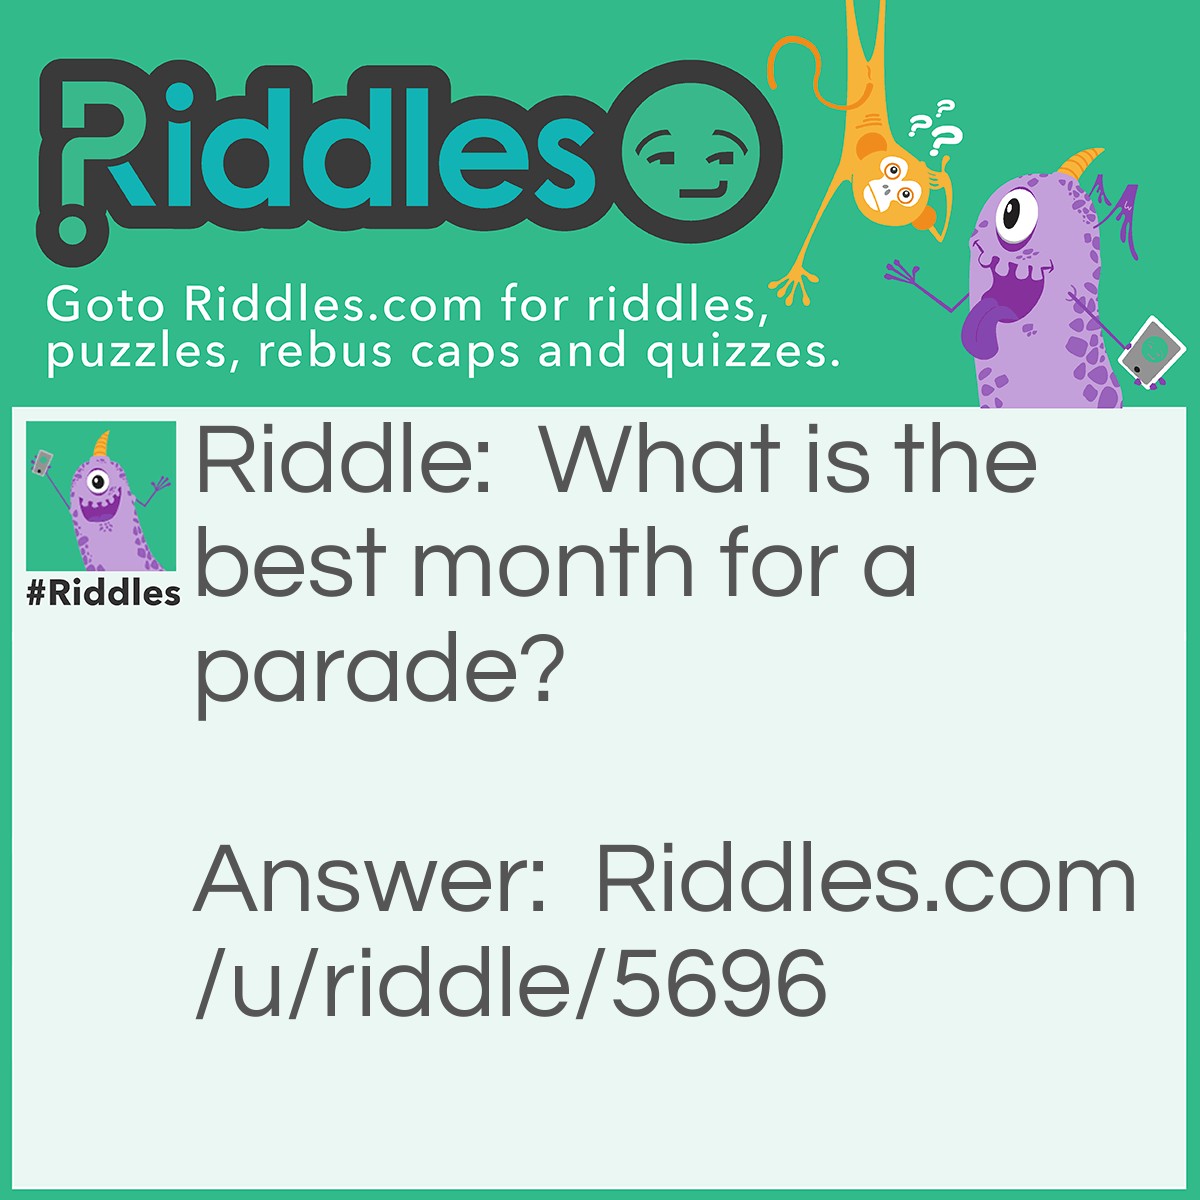 Riddle: What is the best month for a parade? Answer: March.